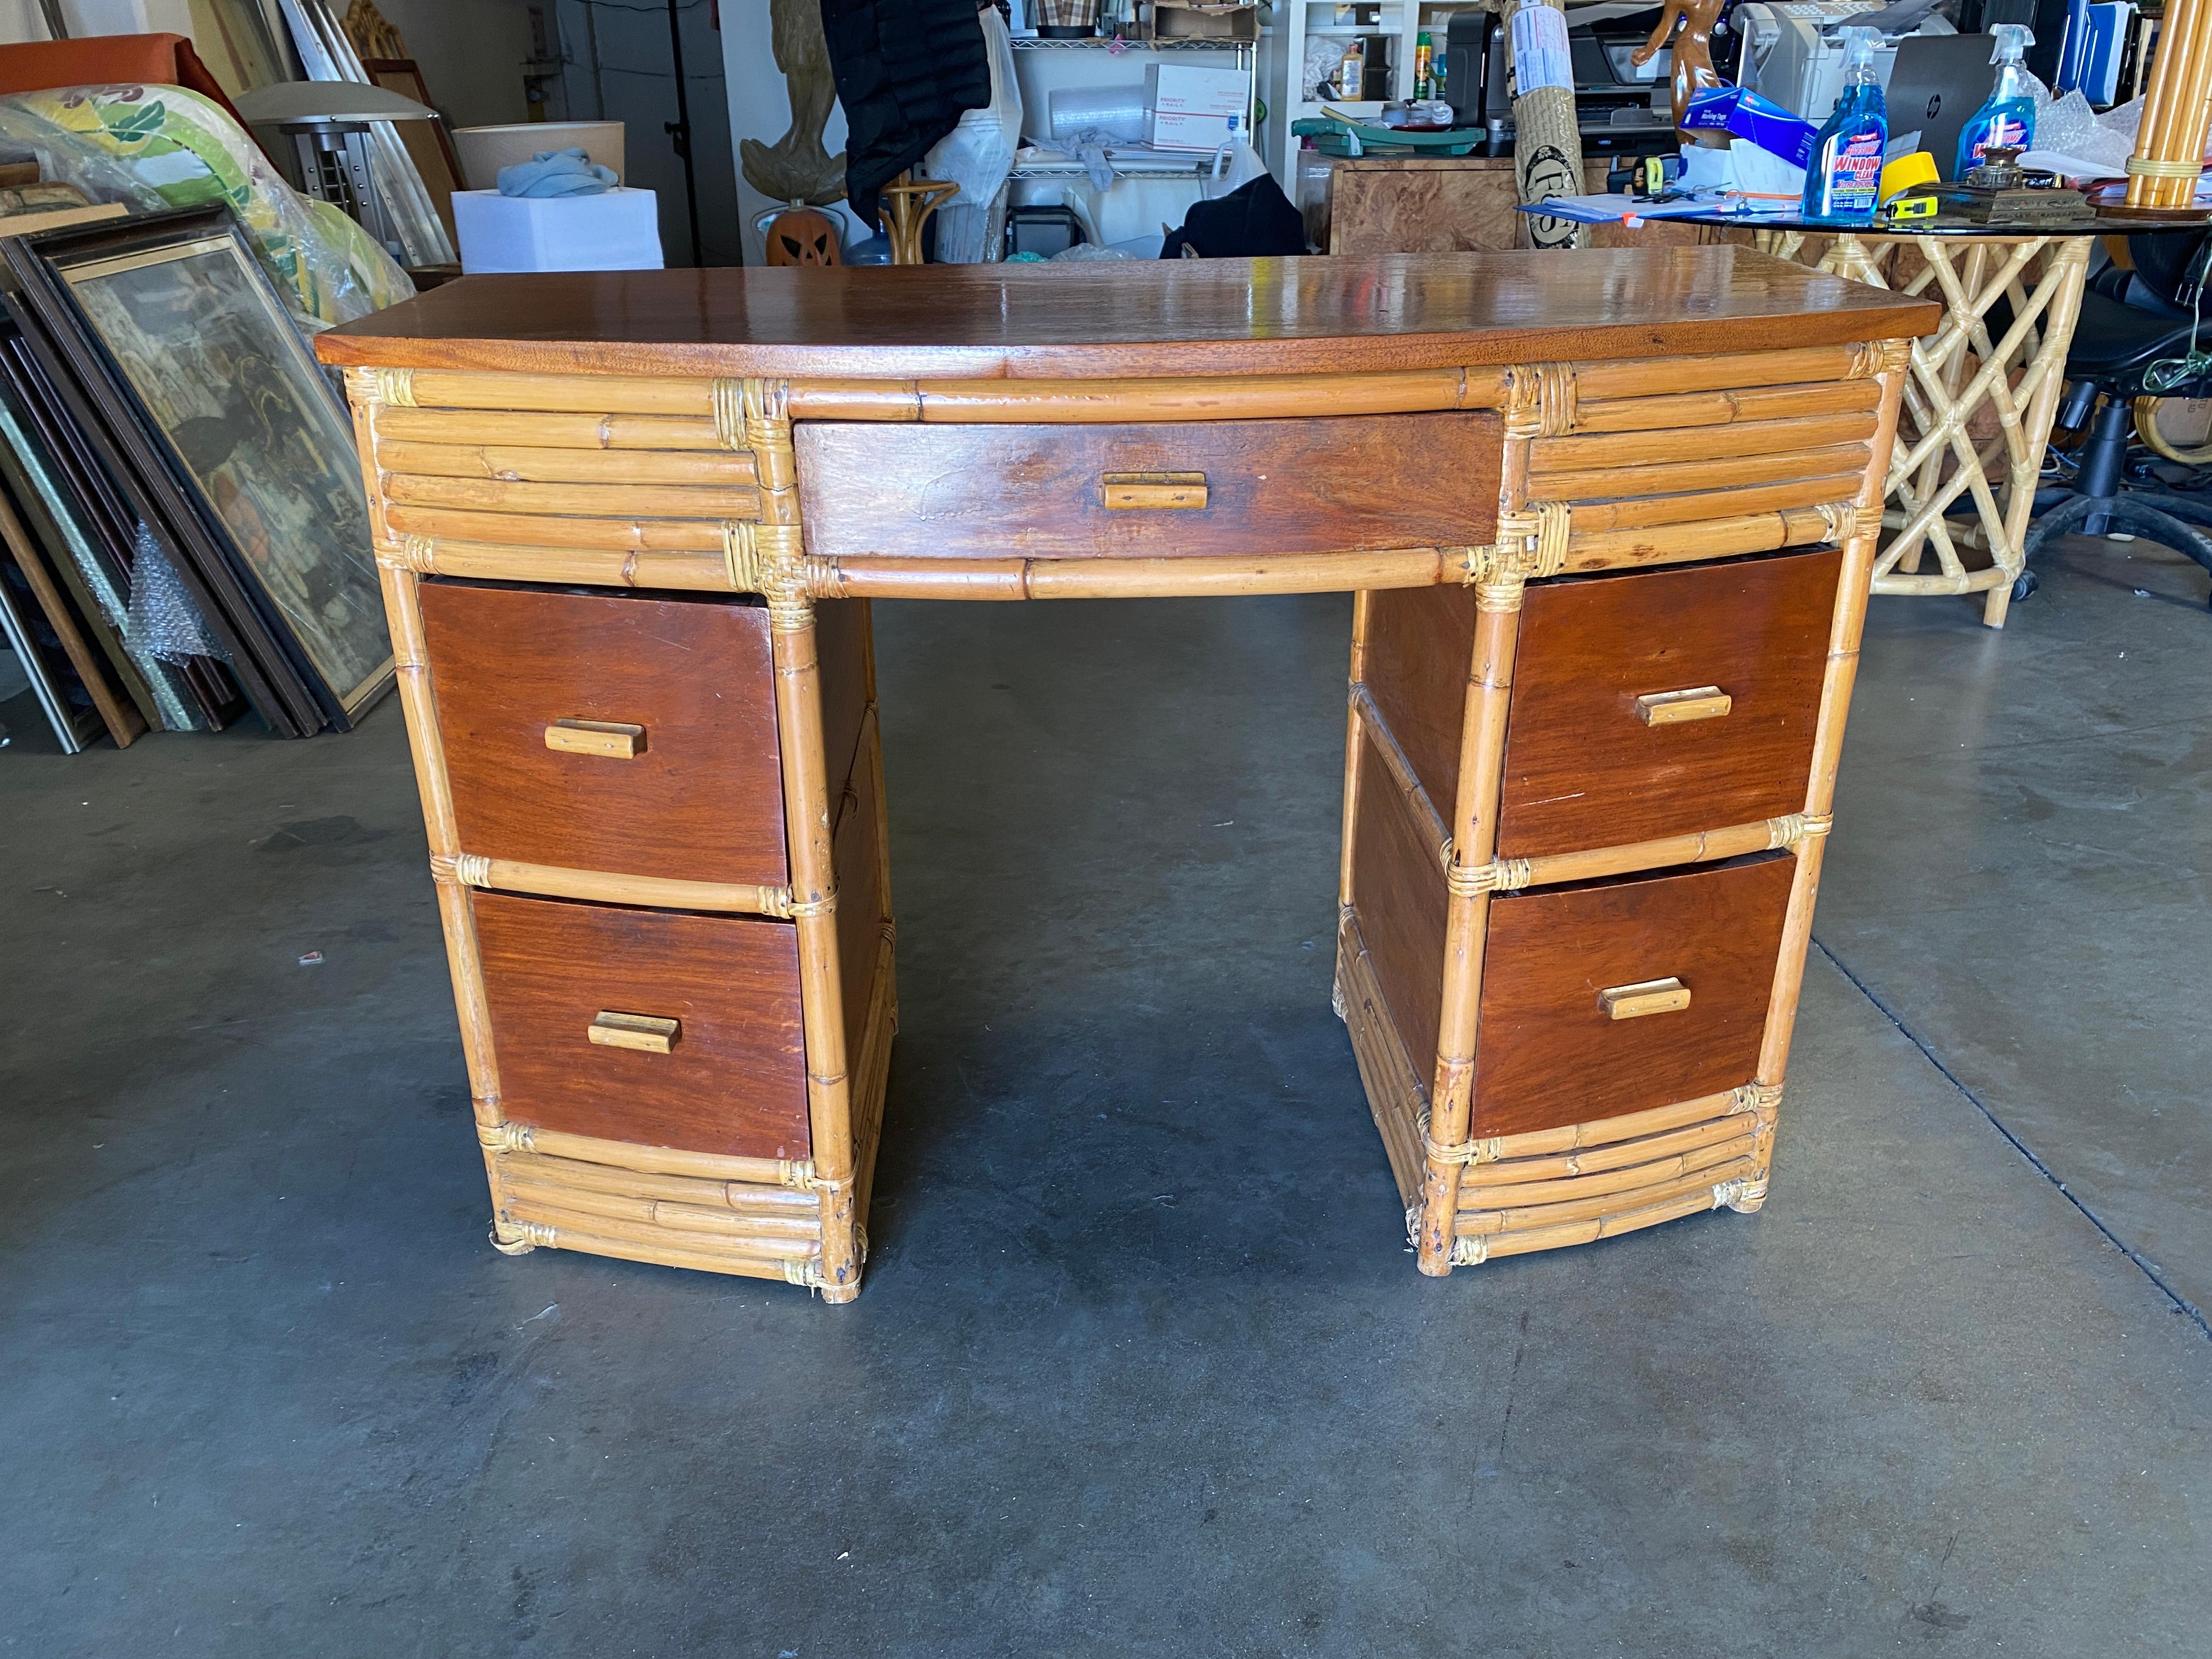 Restored very large stacked rattan desk, with Filipino mahogany Drawer fronts, side panels, and top. The desk features a center drawer and 4 side drawers. Beautiful stacked rattan legs race from the top to the bottom, creating a great modern look.